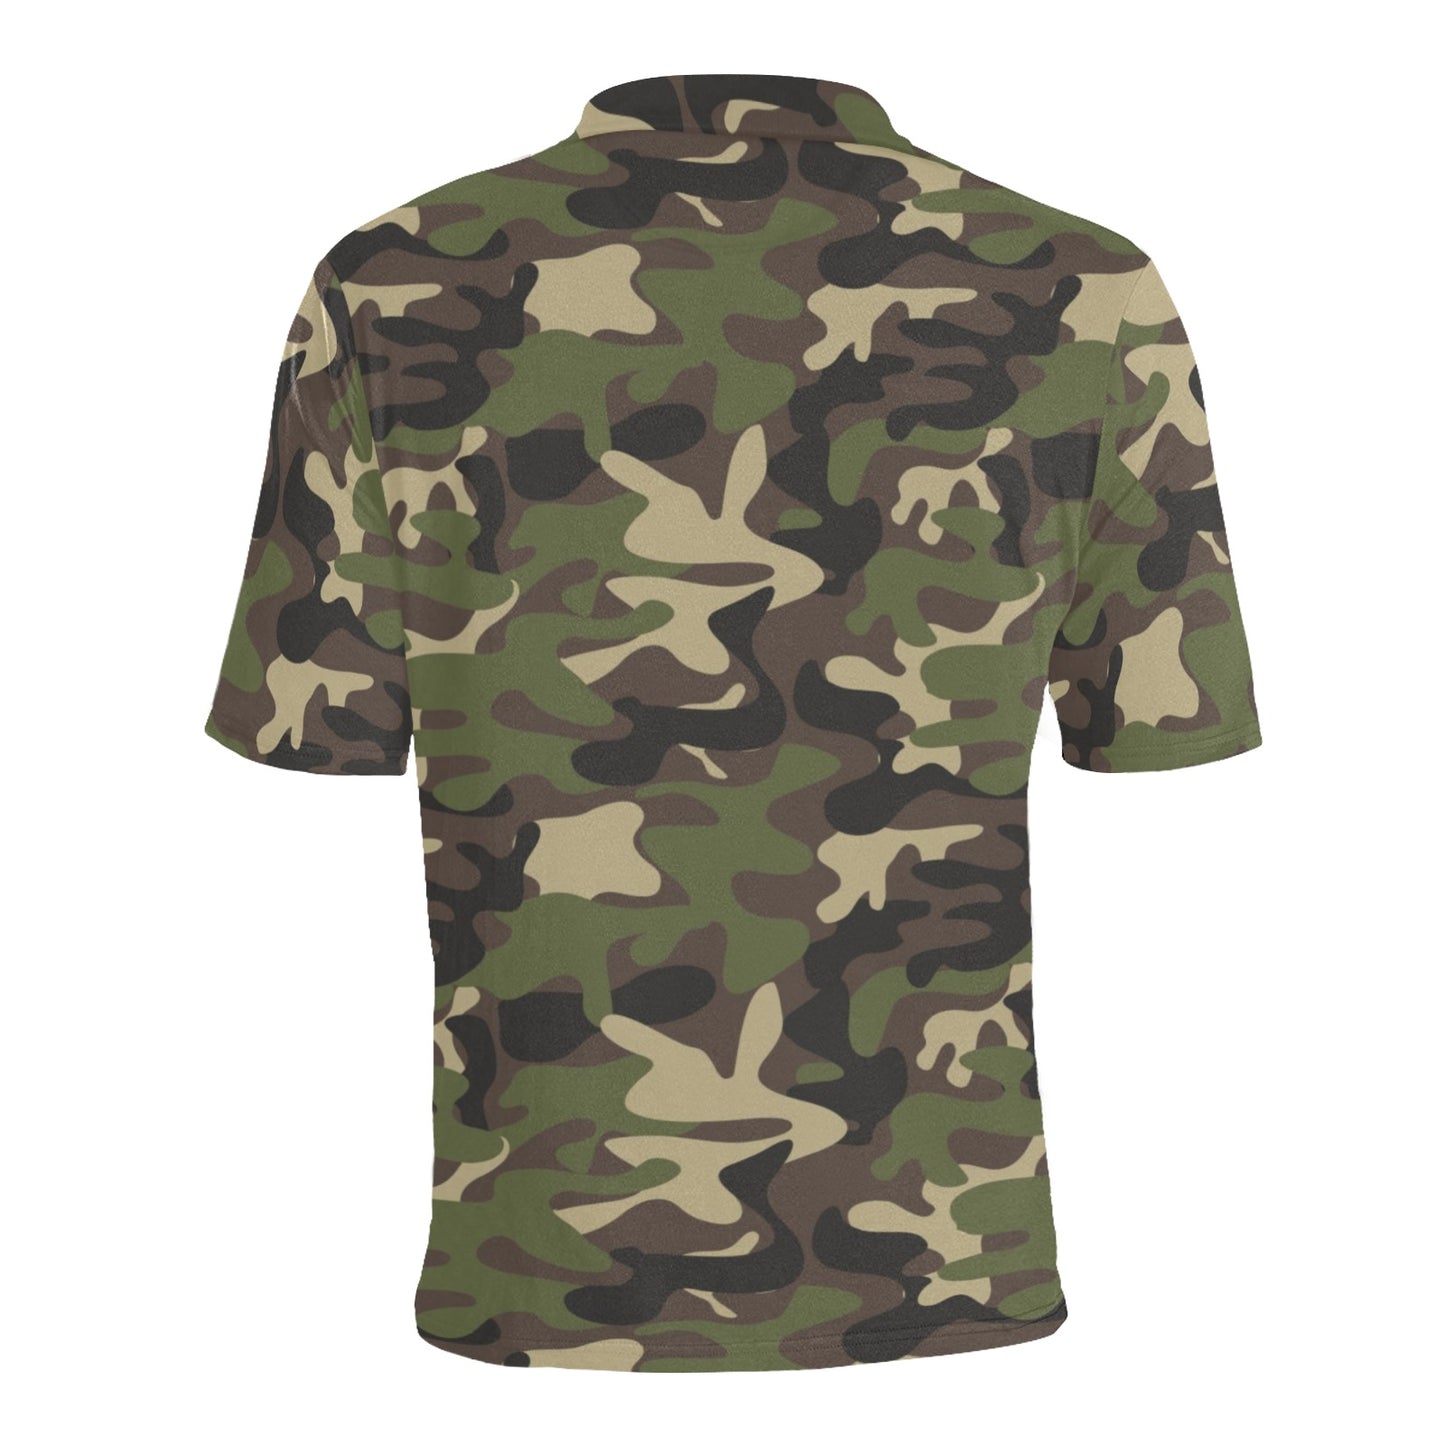 Camouflage Men Polo Collared Shirt, Camo Green Army Pattern Casual Summer Buttoned Down Up Shirt Short Sleeve Sports Golf Tee